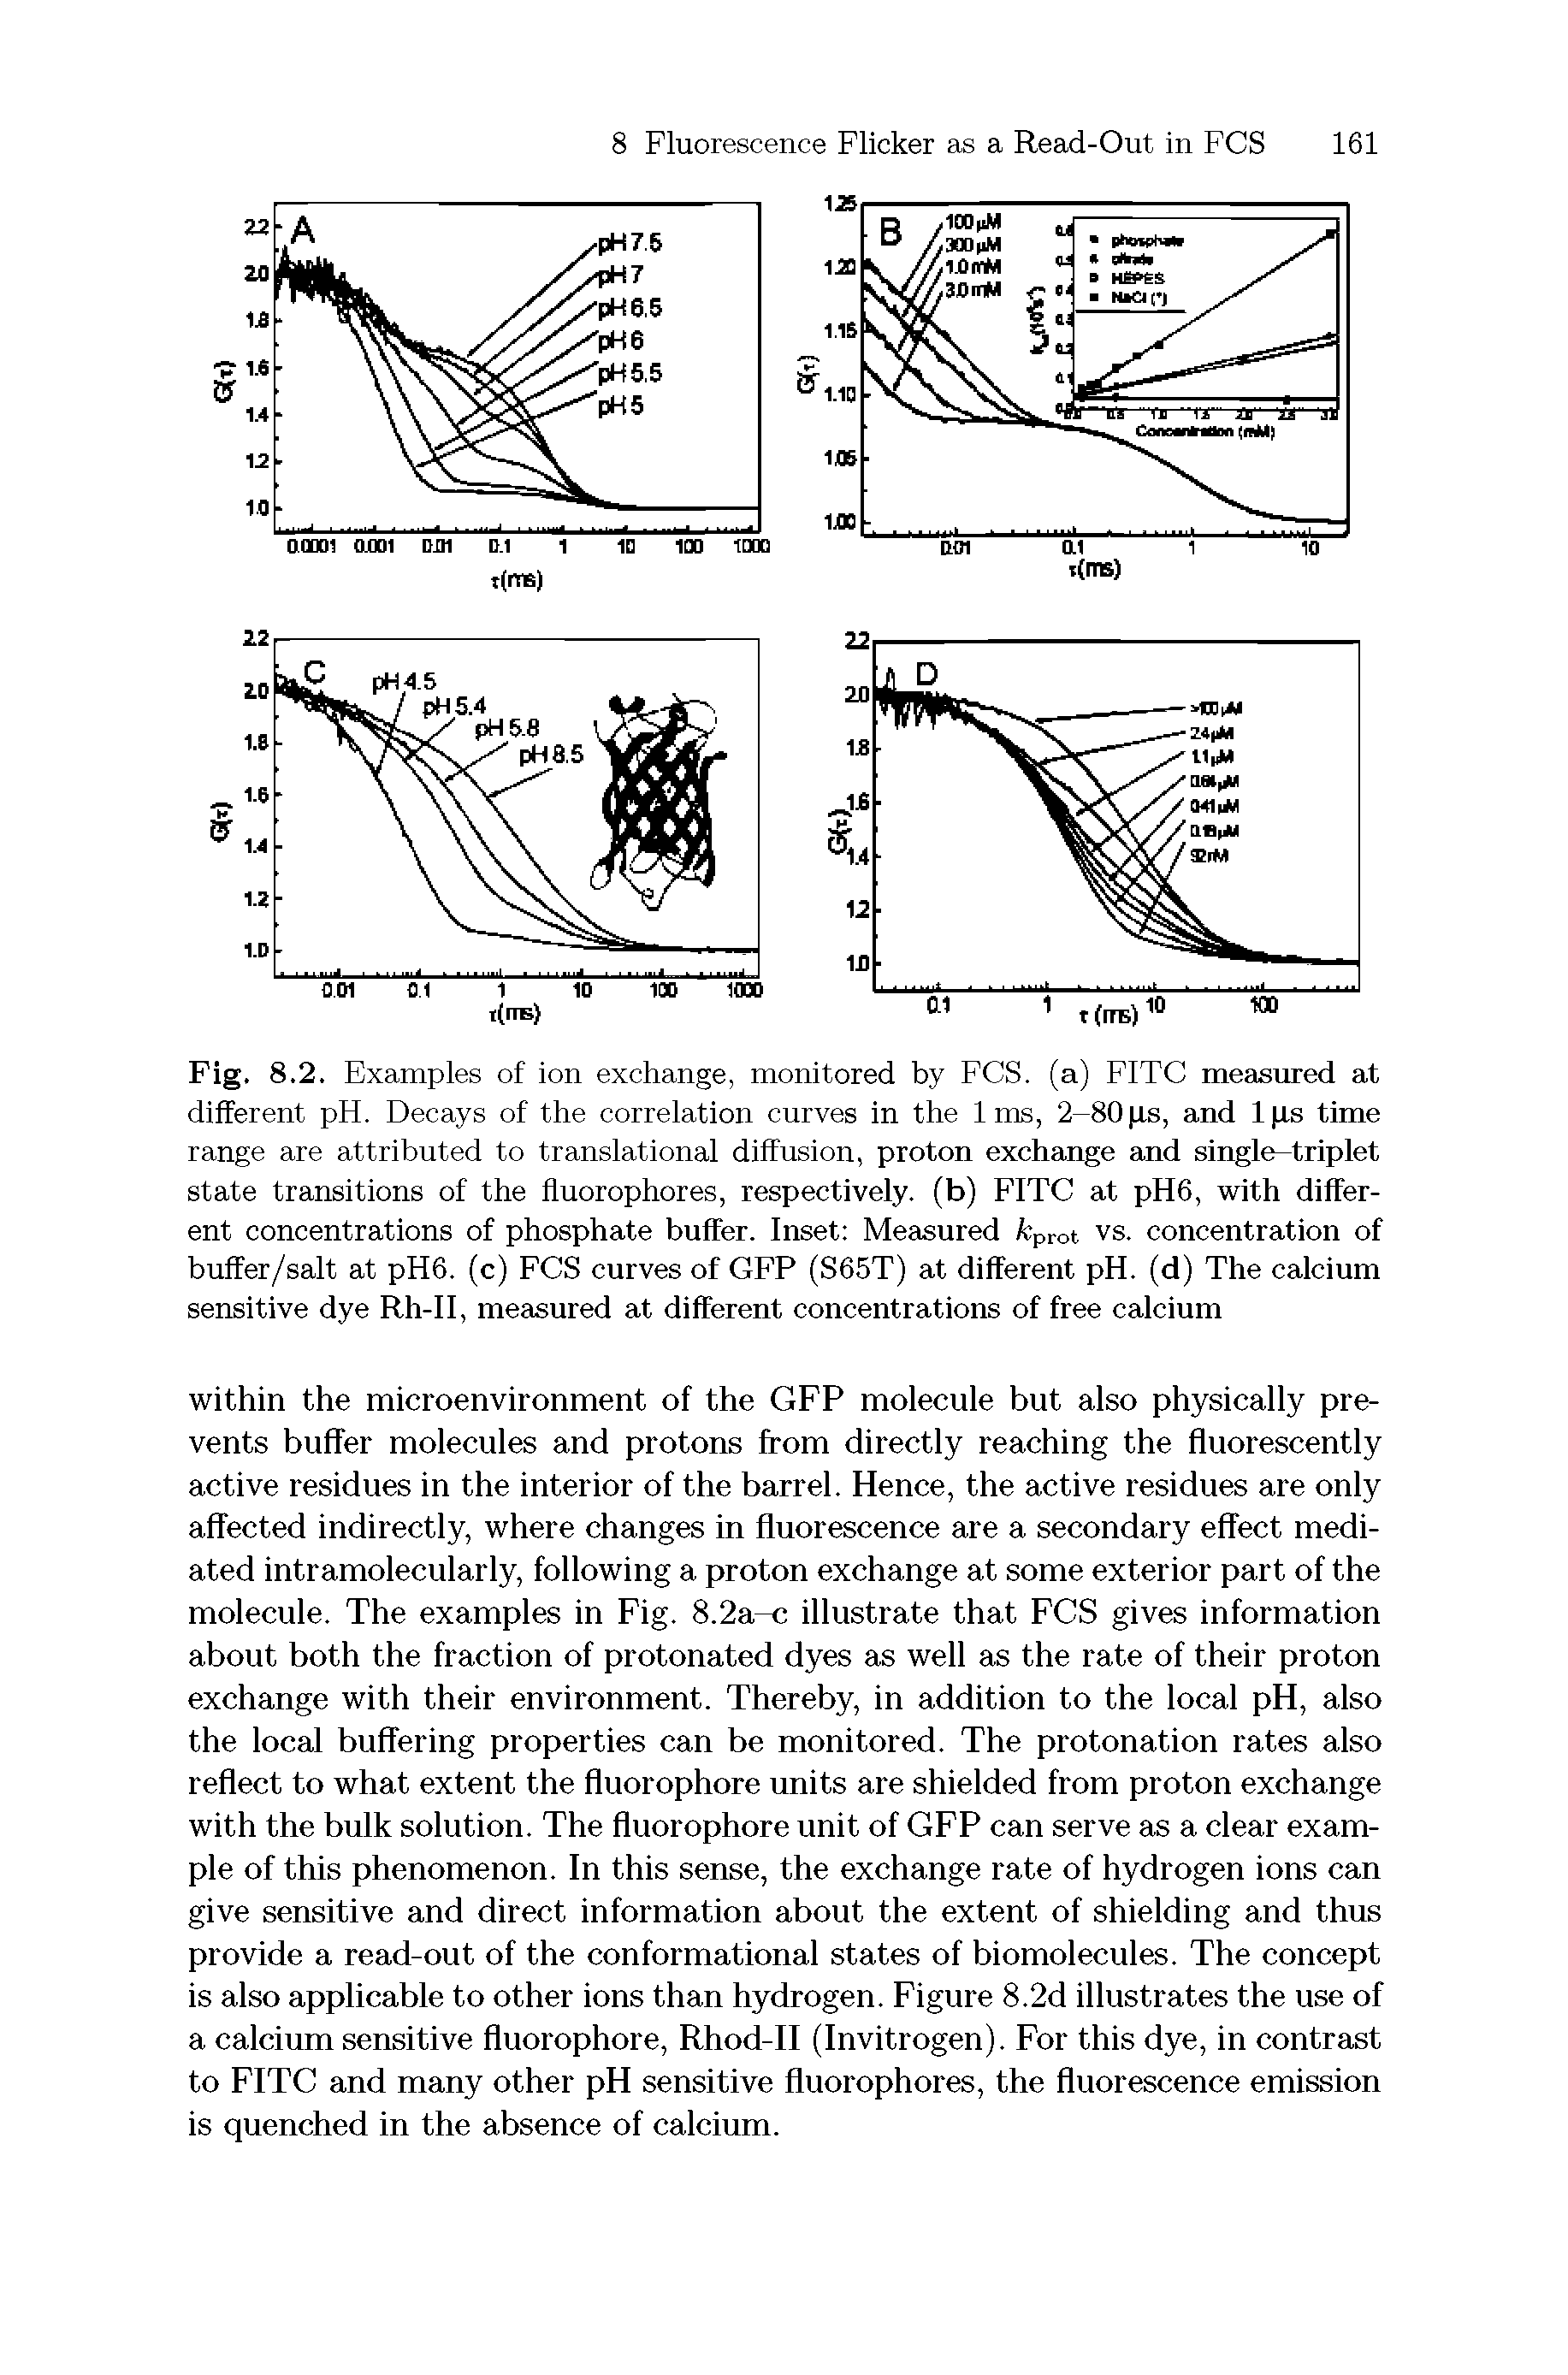 Fig. 8.2. Examples of ion exchange, monitored by FCS. (a) FITC measured at different pH. Decays of the correlation curves in the 1ms, 2-80 xs, and l xs time range are attributed to translational diffusion, proton exchange and single-triplet state transitions of the fluorophores, respectively, (b) FITC at pH6, with different concentrations of phosphate buffer. Inset Measured fcprot vs. concentration of buffer/salt at pH6. (c) FCS curves of GFP (S65T) at different pH. (d) The calcium sensitive dye Rh-II, measured at different concentrations of free calcium...